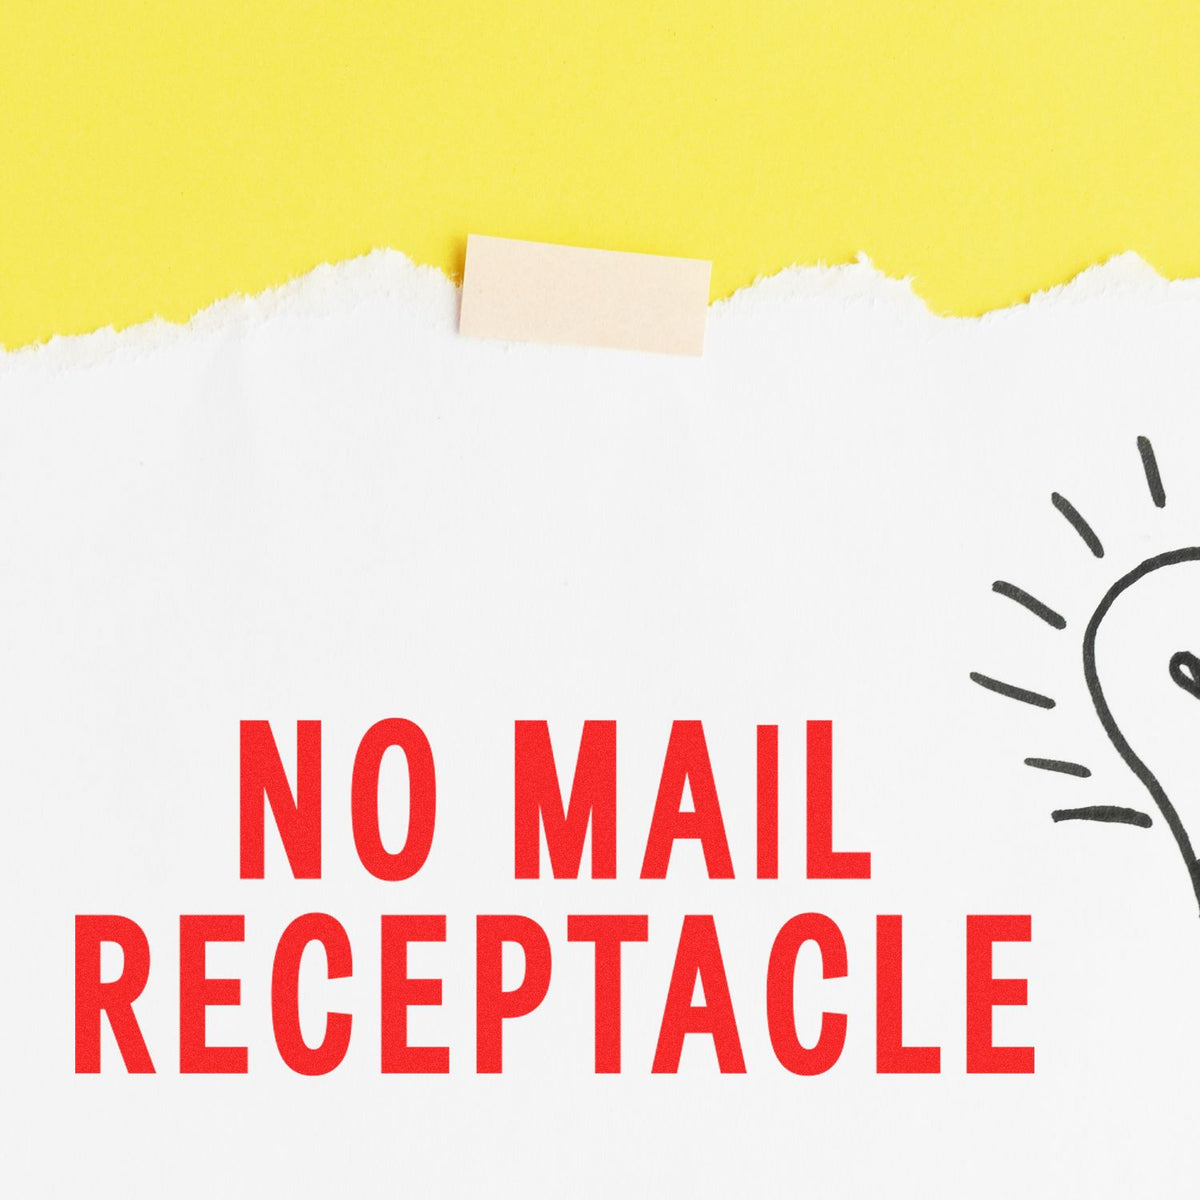 No Mail Receptacle Rubber Stamp In Use Photo